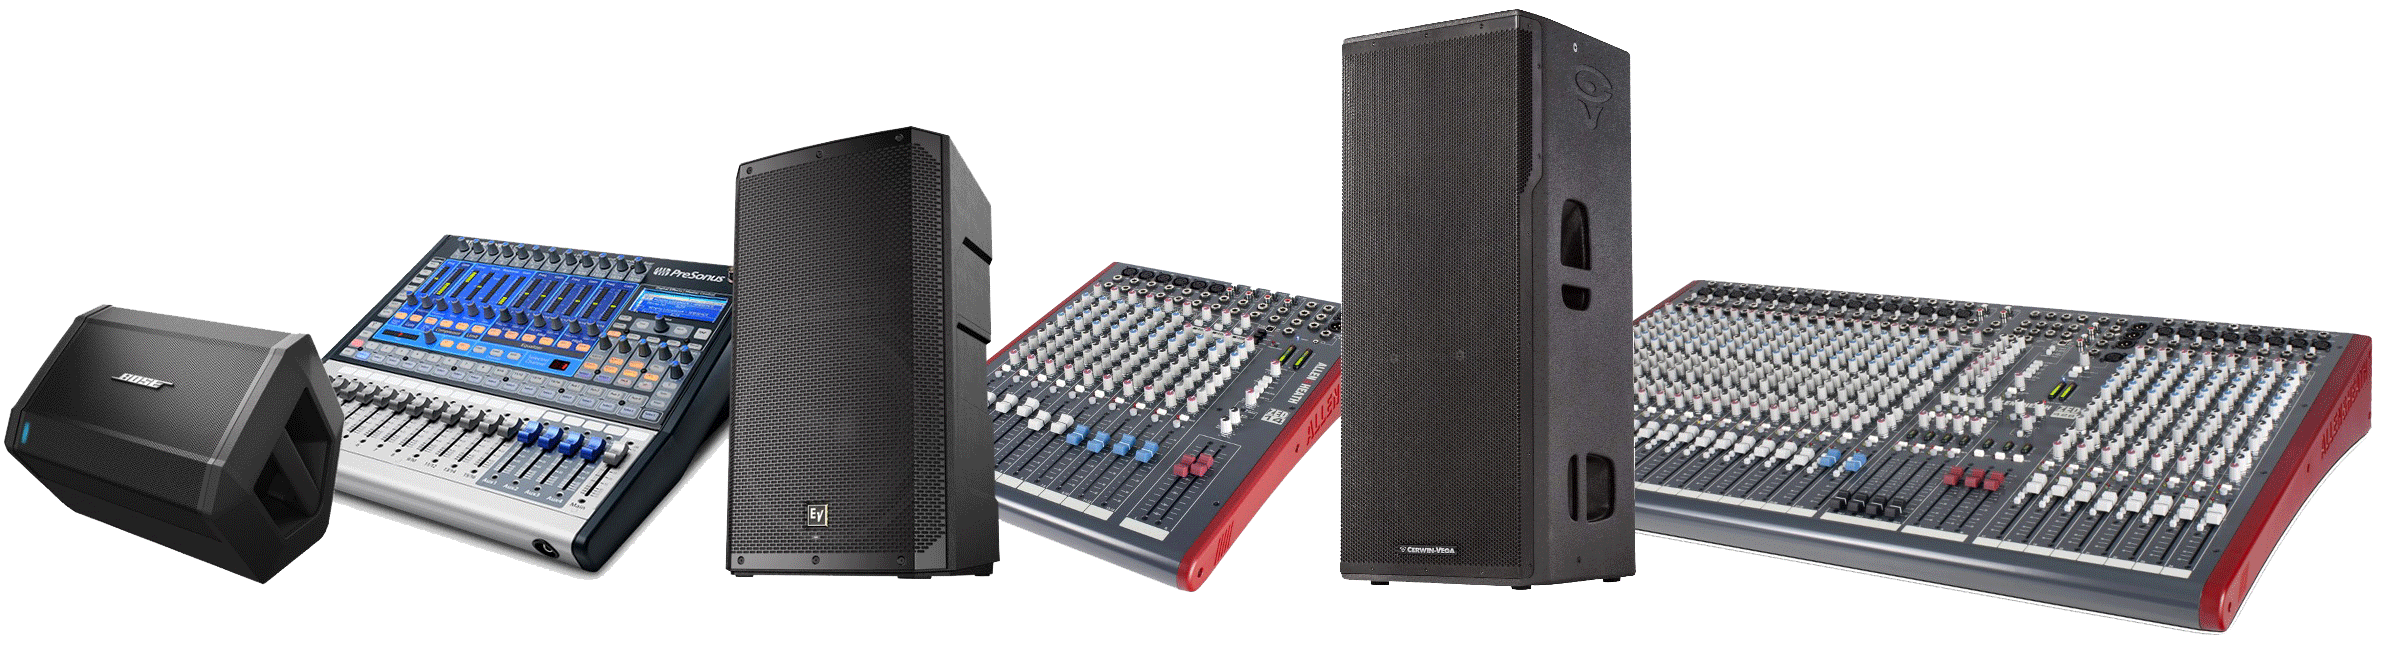 PA equipment including speakers and mixers